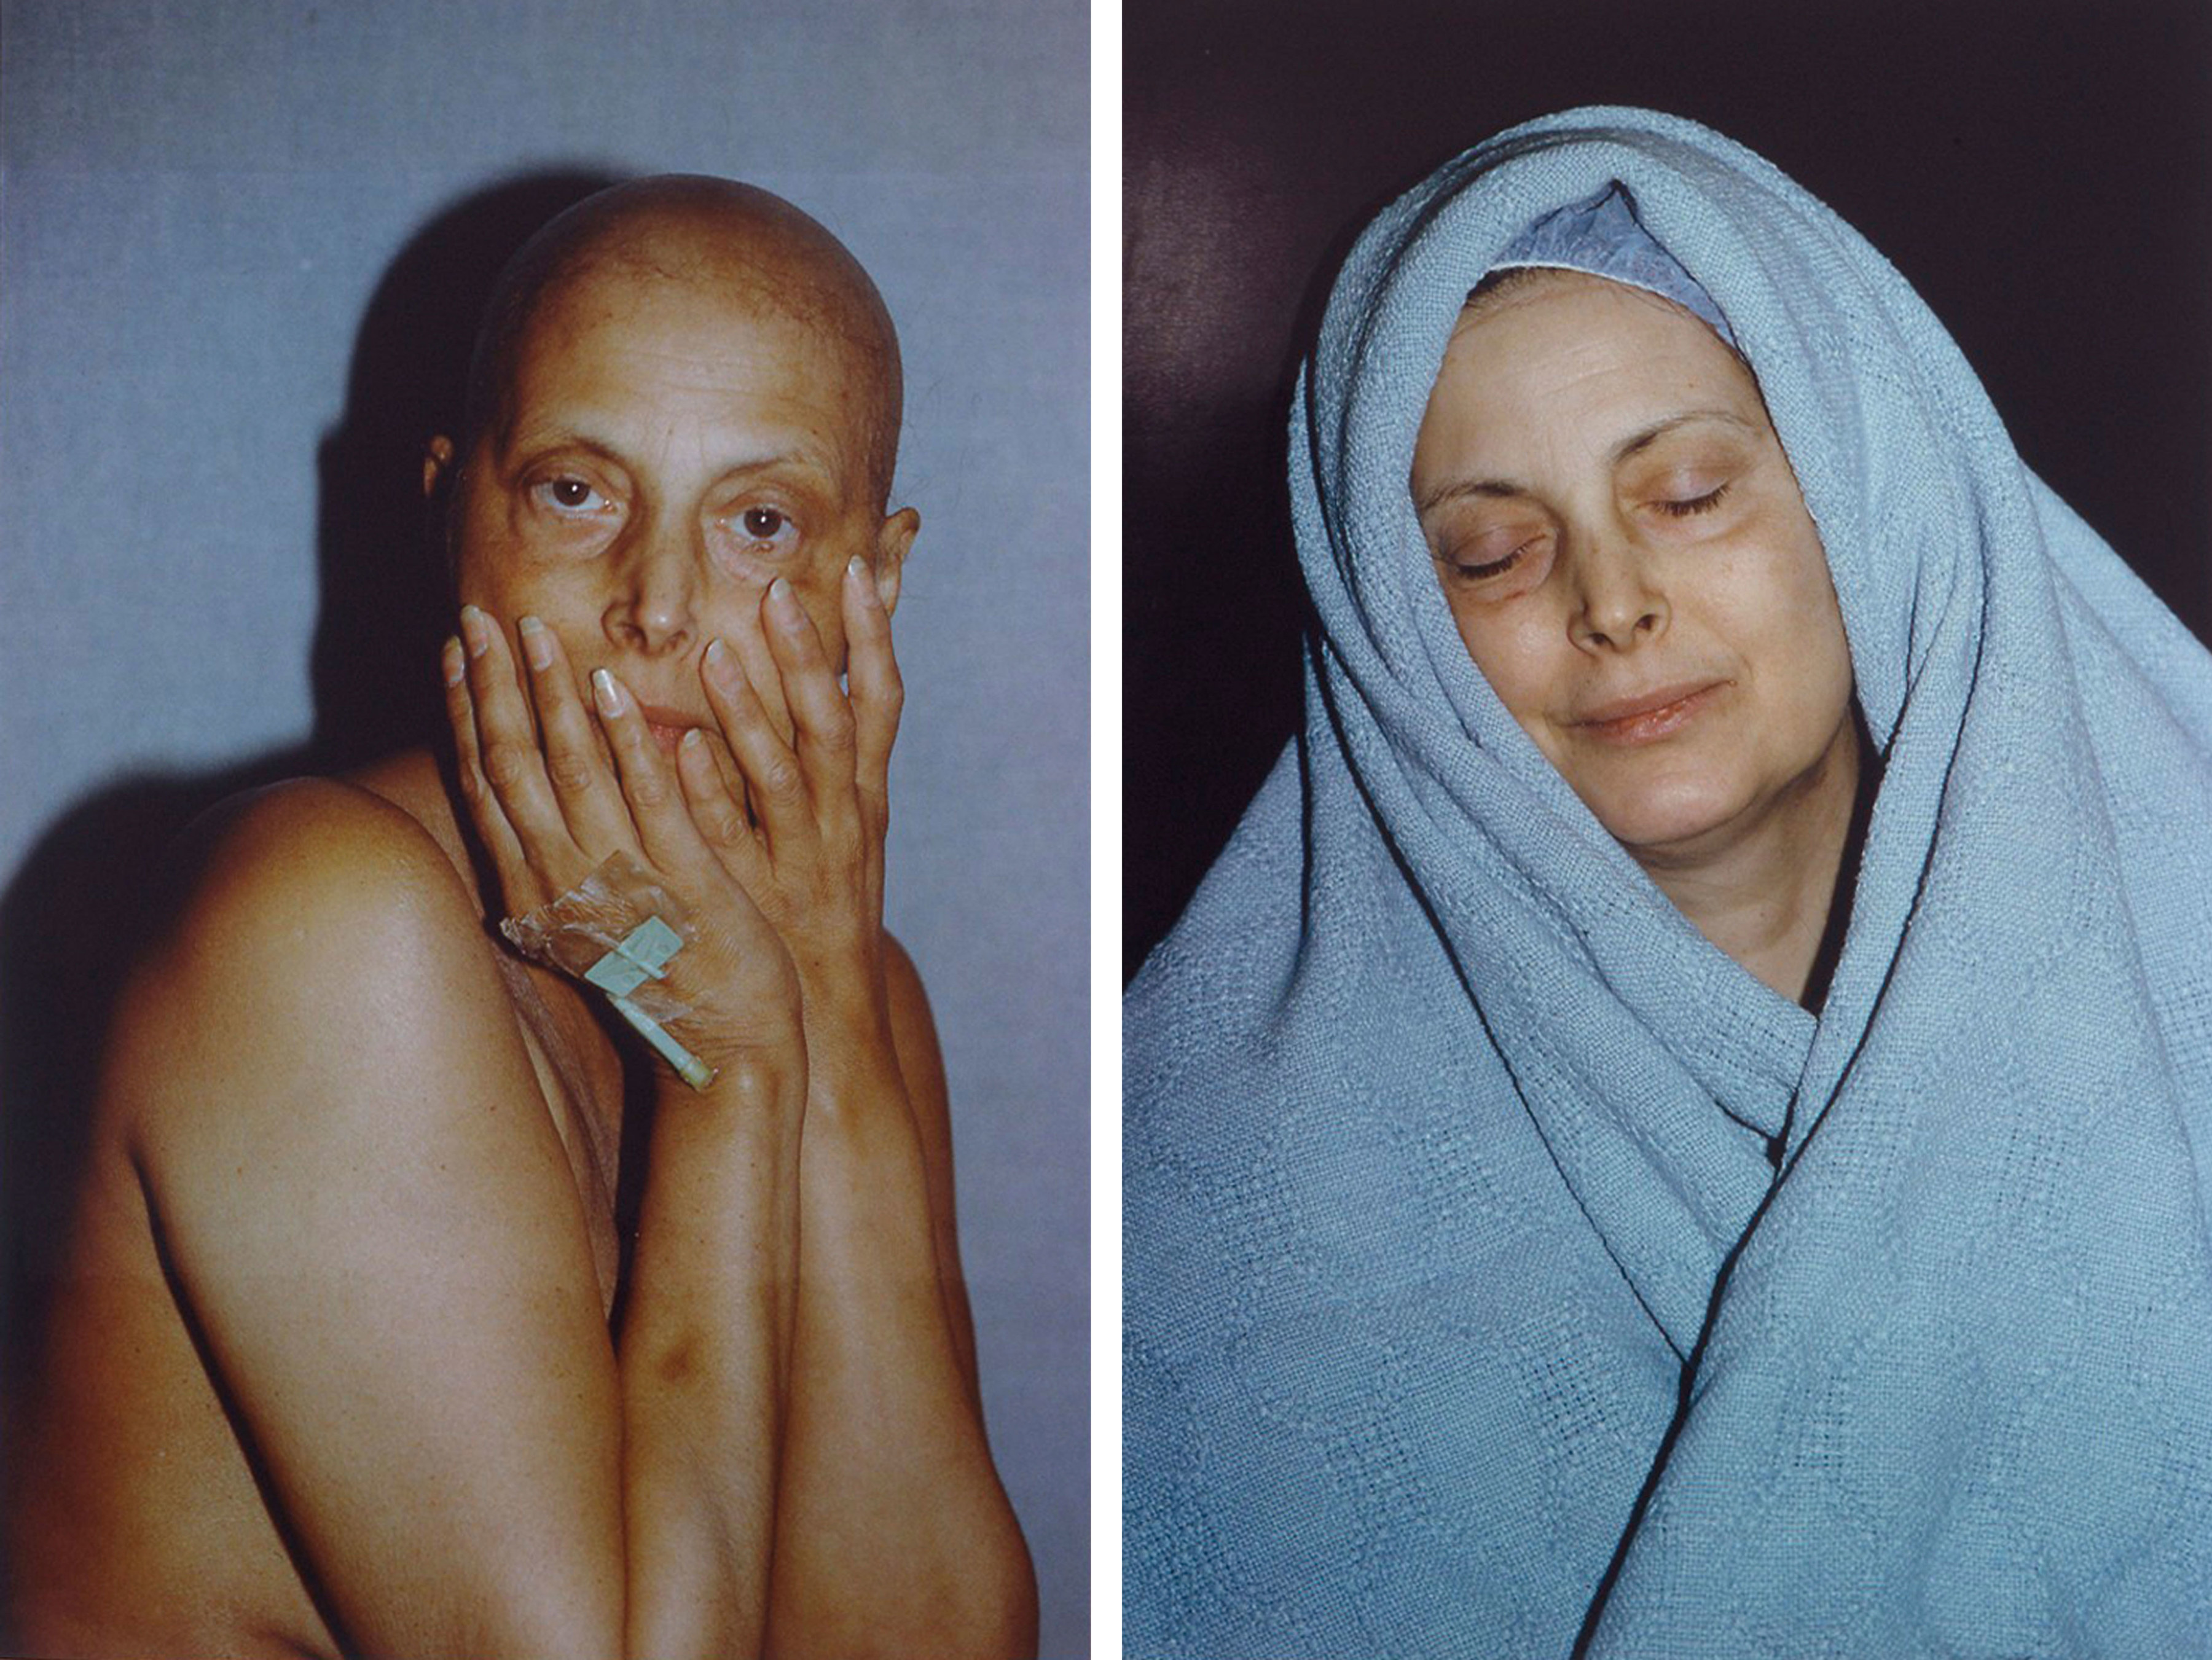 Hannah Wilke
Intra-Venus Series No. 4, July 26 and February 19, 1992, 1992
Two Chromogenic supergloss prints
Each photograph: 71 1/2 &amp;times; 47 1/2 inches (181.6 &amp;times; 120.7 cm)
Performalist Self-Portraits with Donald Goddard
Hannah Wilke Collection &amp;amp; Archive, Los Angeles.
Courtesy Alison Jacques, London.
&amp;copy; Donald Goddard. Courtesy Donald and Helen Goddard and Ronald Feldman Gallery, New York.